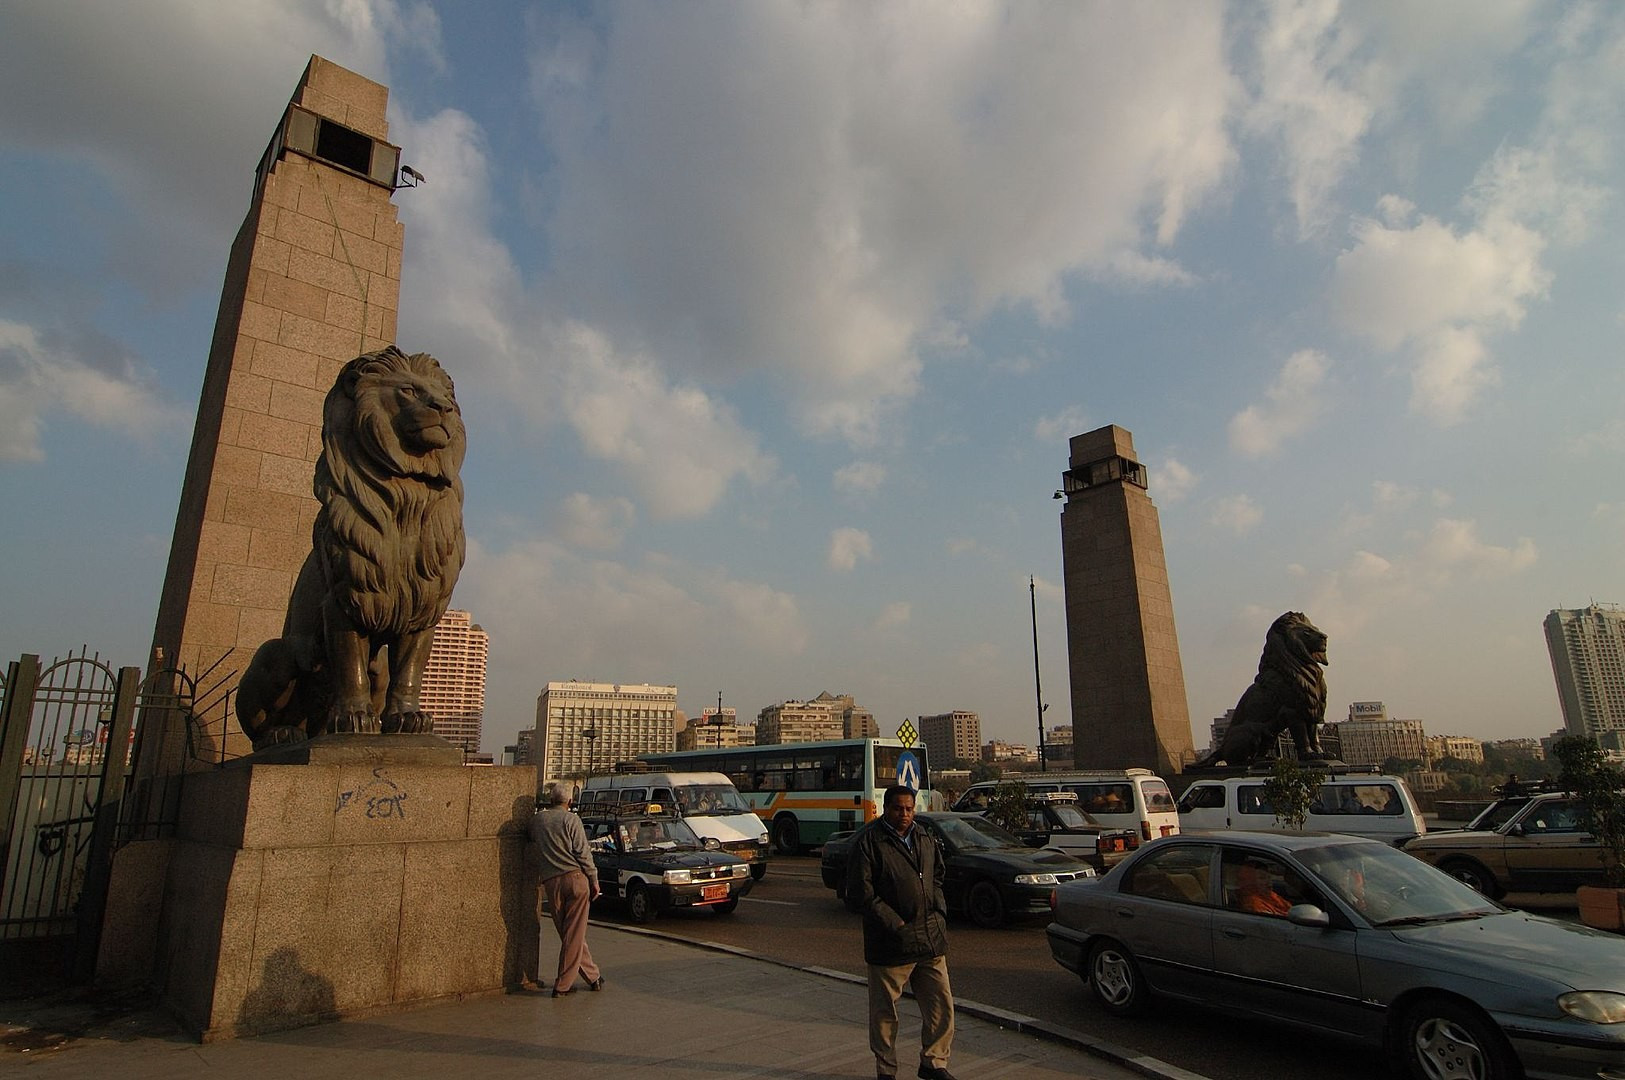 By Francesco Gasparetti - originally posted to Flickr as Cairo: ponte el tahrir, CC BY 2.0, https://commons.wikimedia.org/w/index.php?curid=4481252